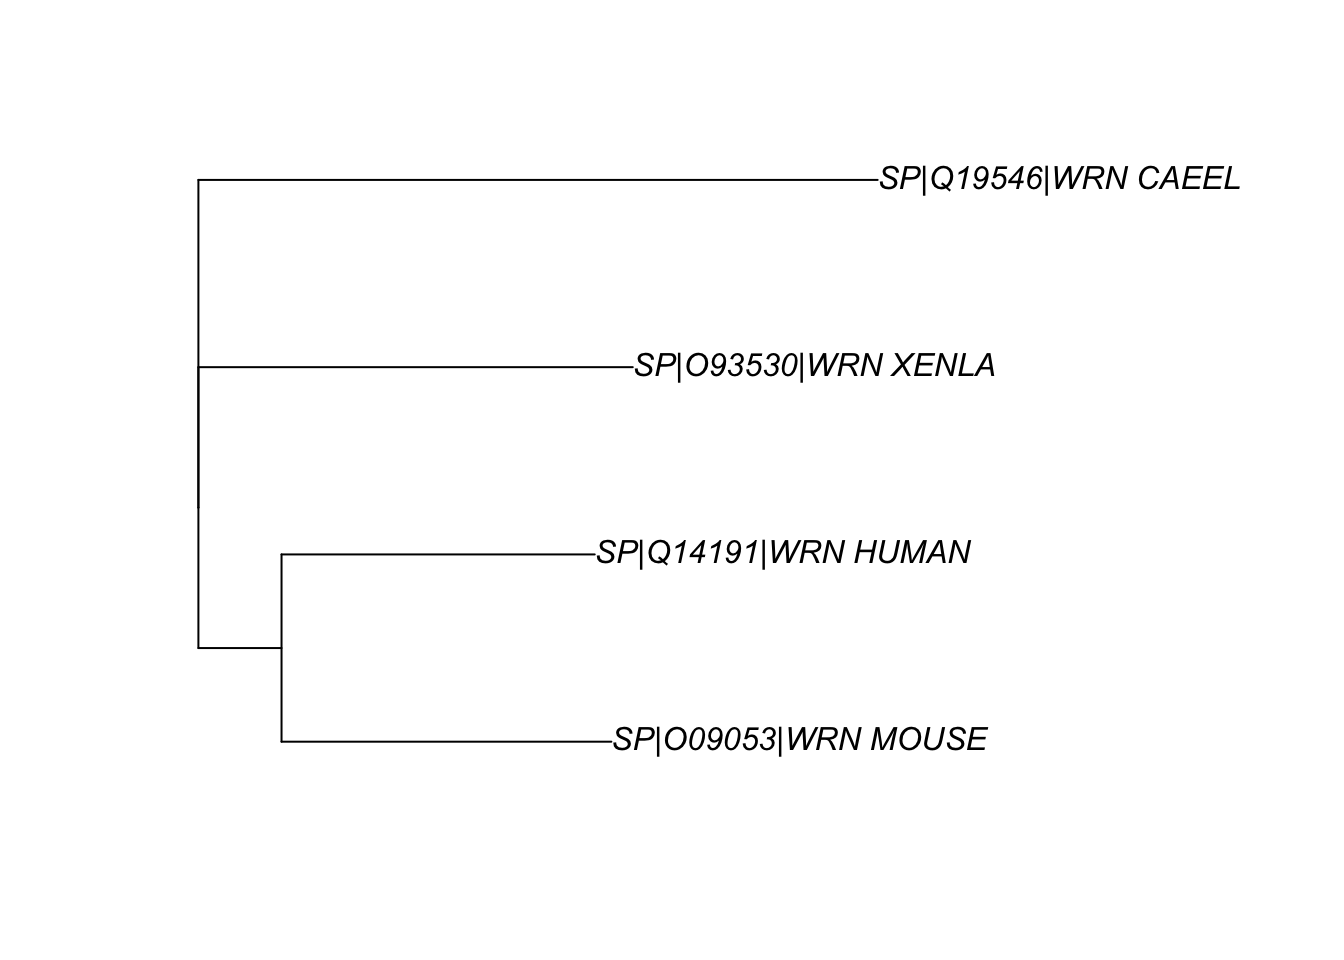 The phylogenetic relationship between the WRN homologs in 4 organisms